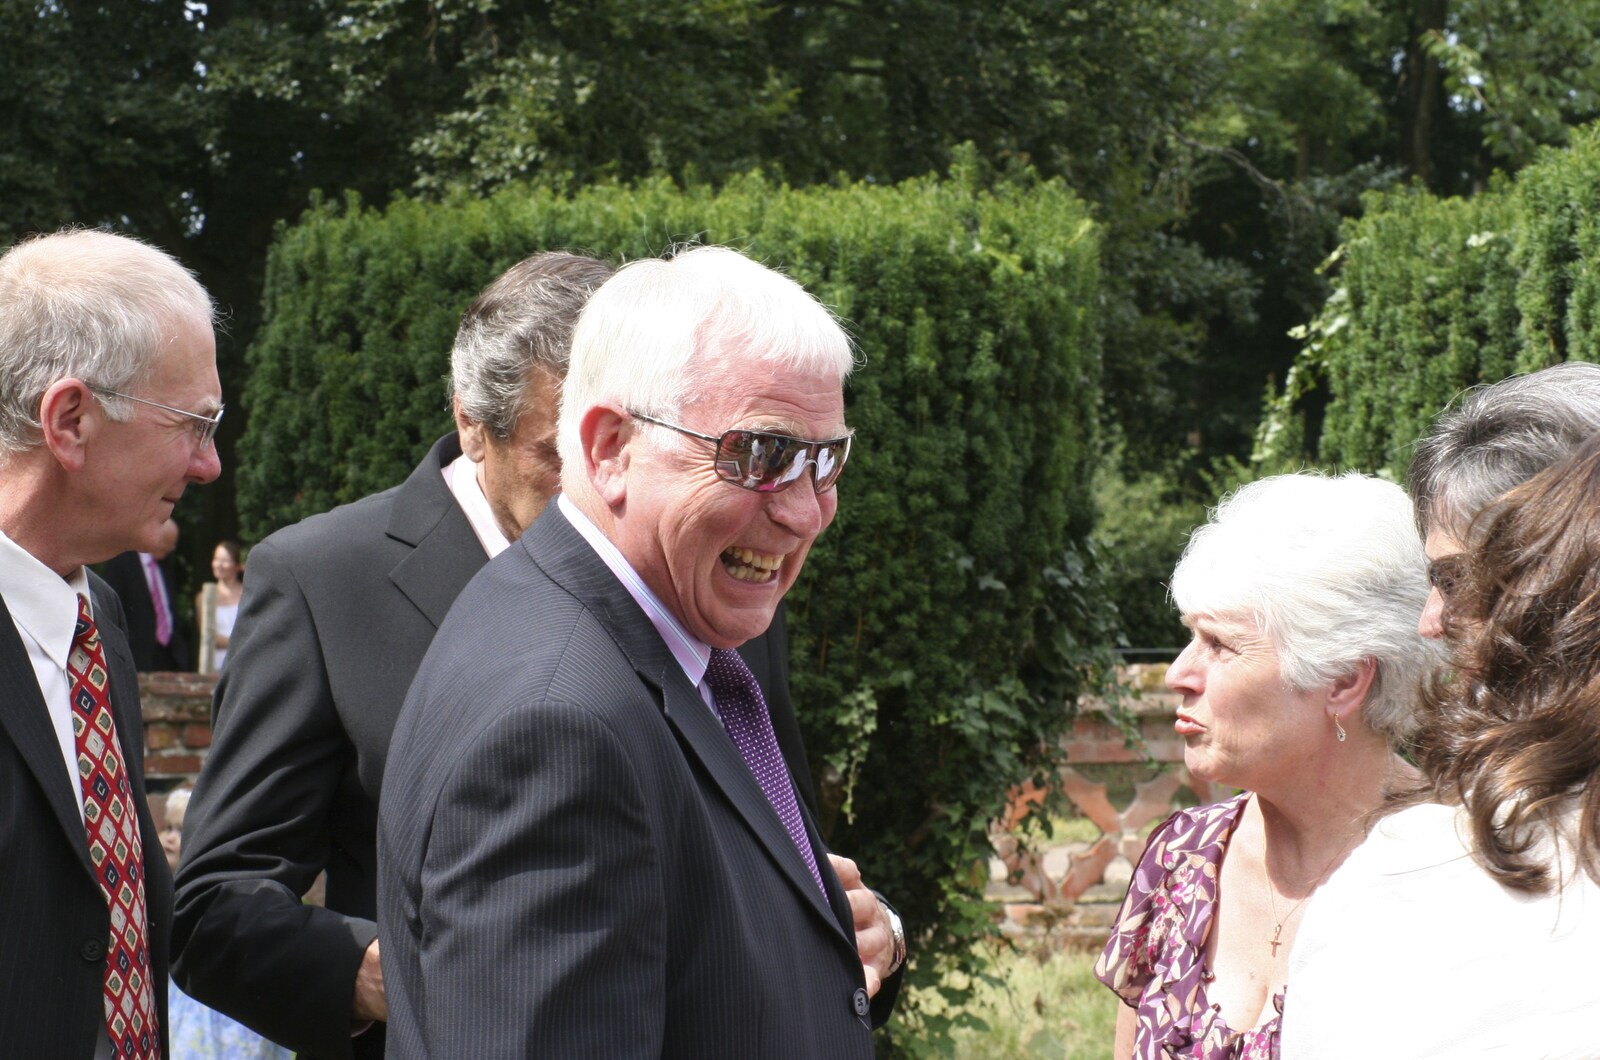 Colin has a laff from Nosher and Isobel's Wedding, Brome, Suffolk - 3rd July 2010